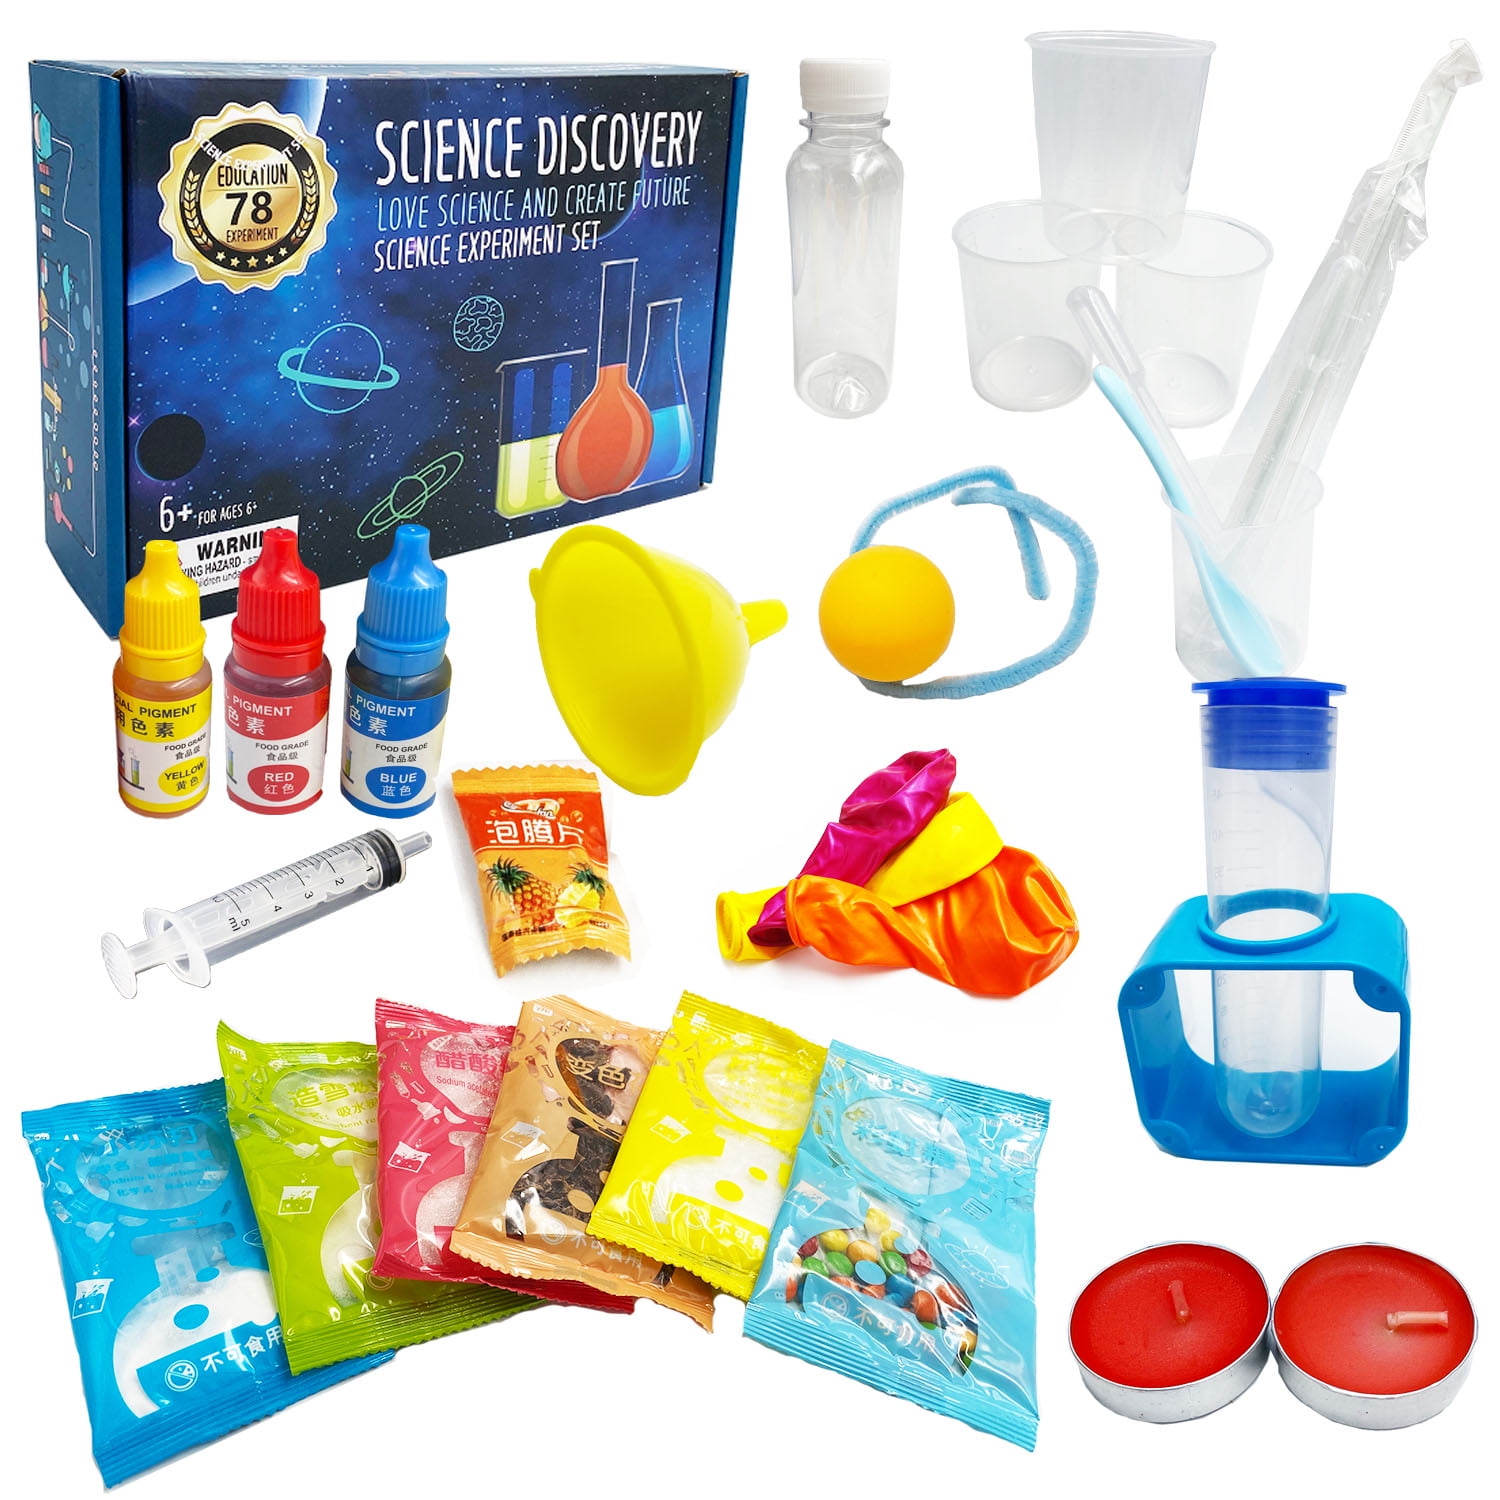 4M Weather Science Kit 3689 885608332605 for sale online 